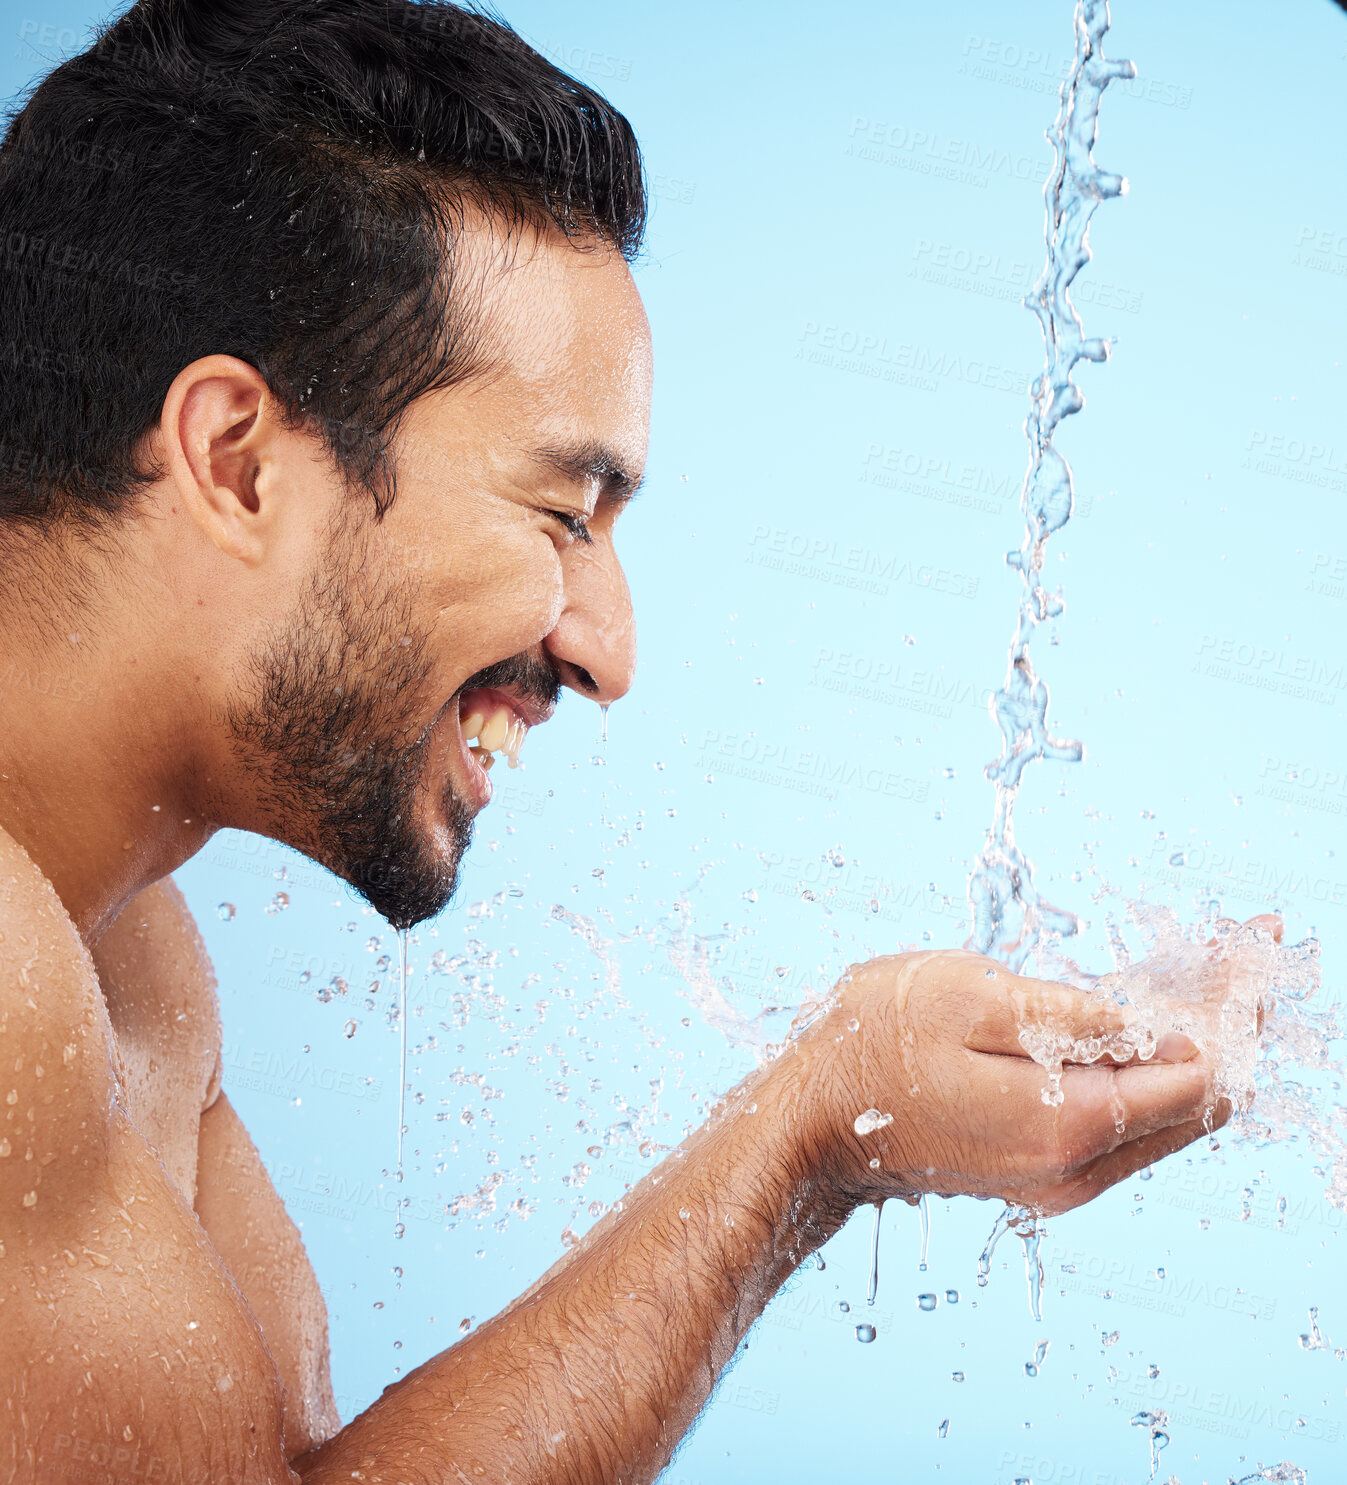 Buy stock photo Water, hands or man in shower in studio cleaning body for wellness or skincare with a happy smile. Water splash, mock up or relaxed model washing for self care grooming with marketing or mockup space